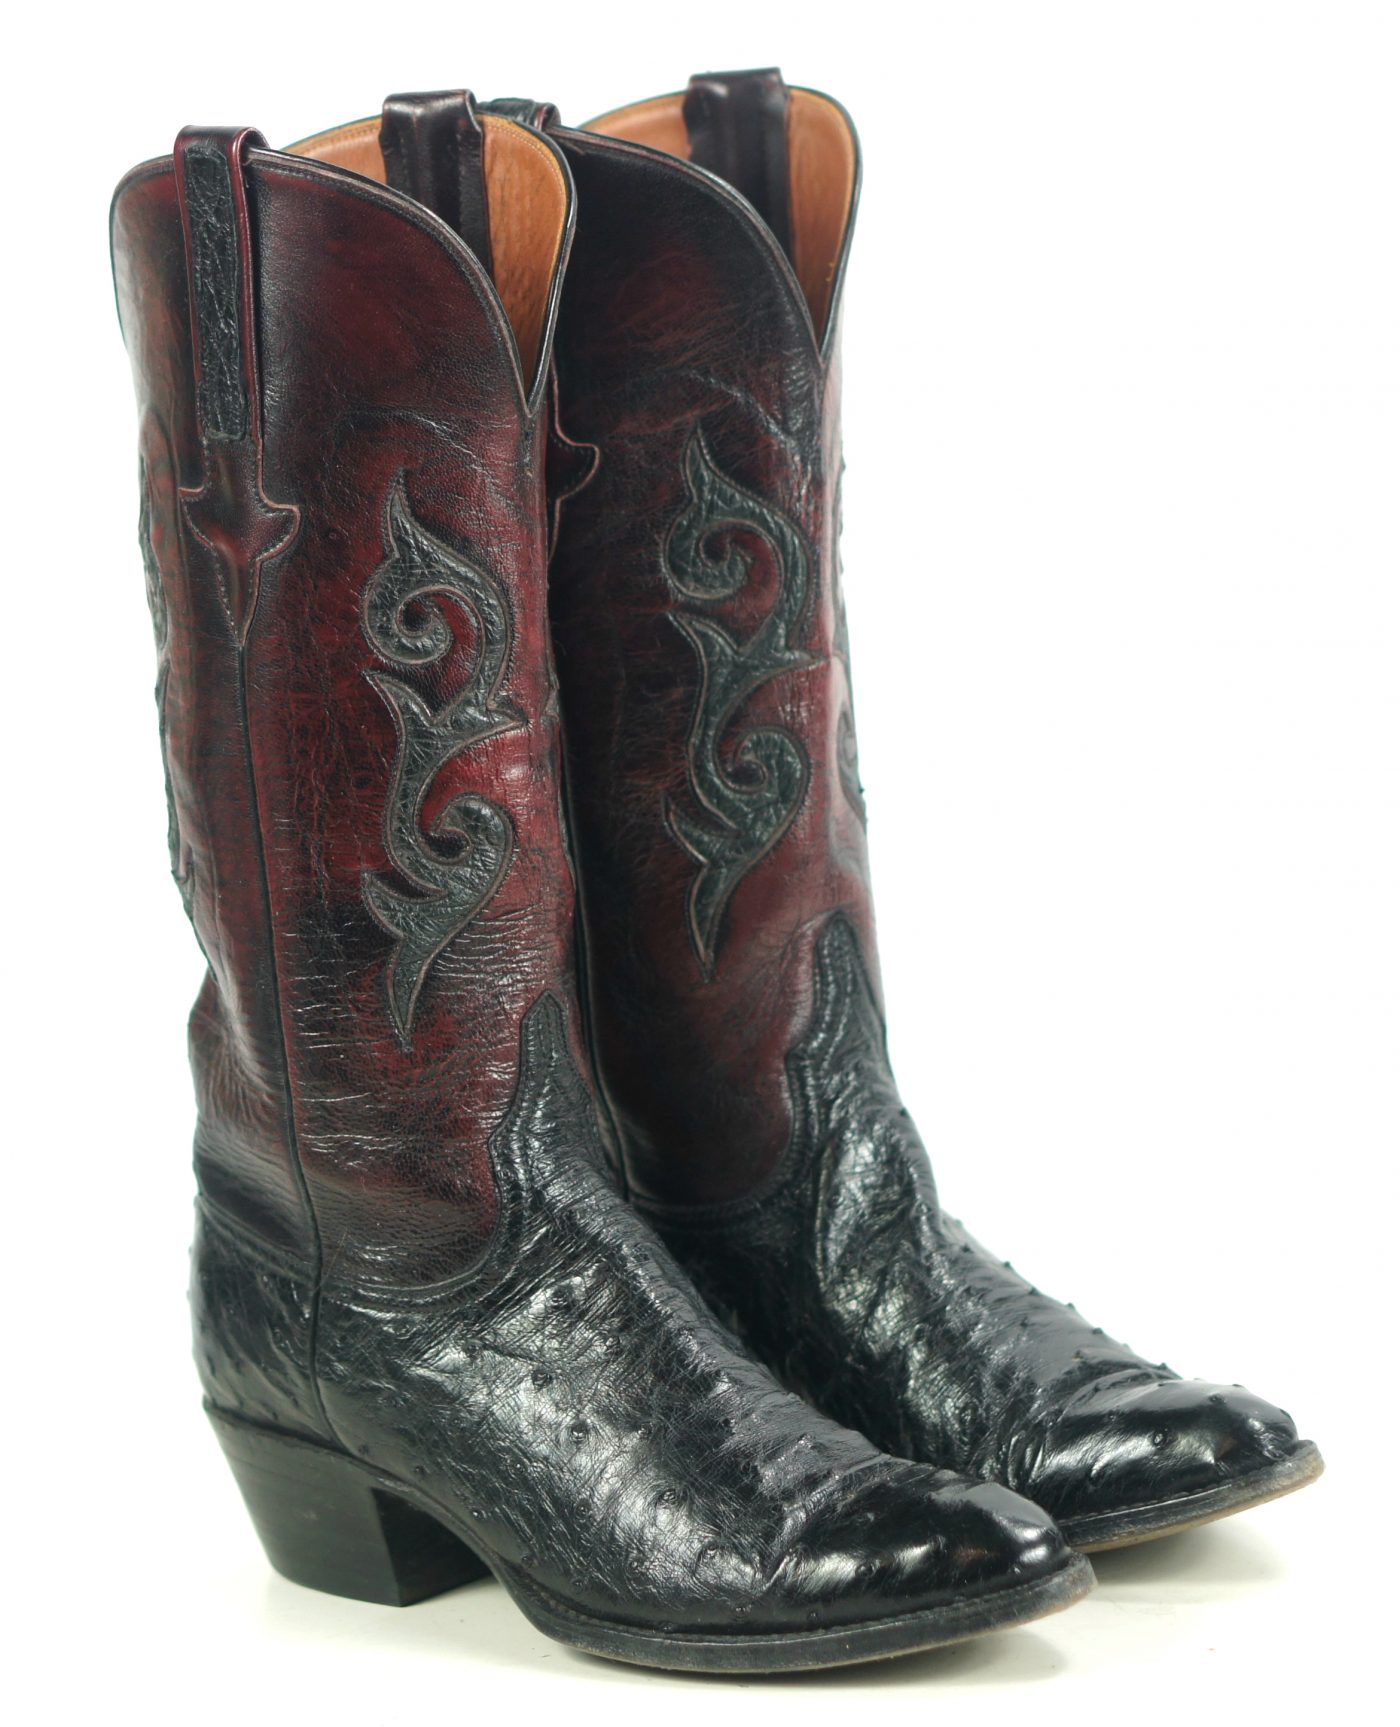 Lucchese Classics Black Cherry Full Quill Ostrich Cowboy Boots US Made ...